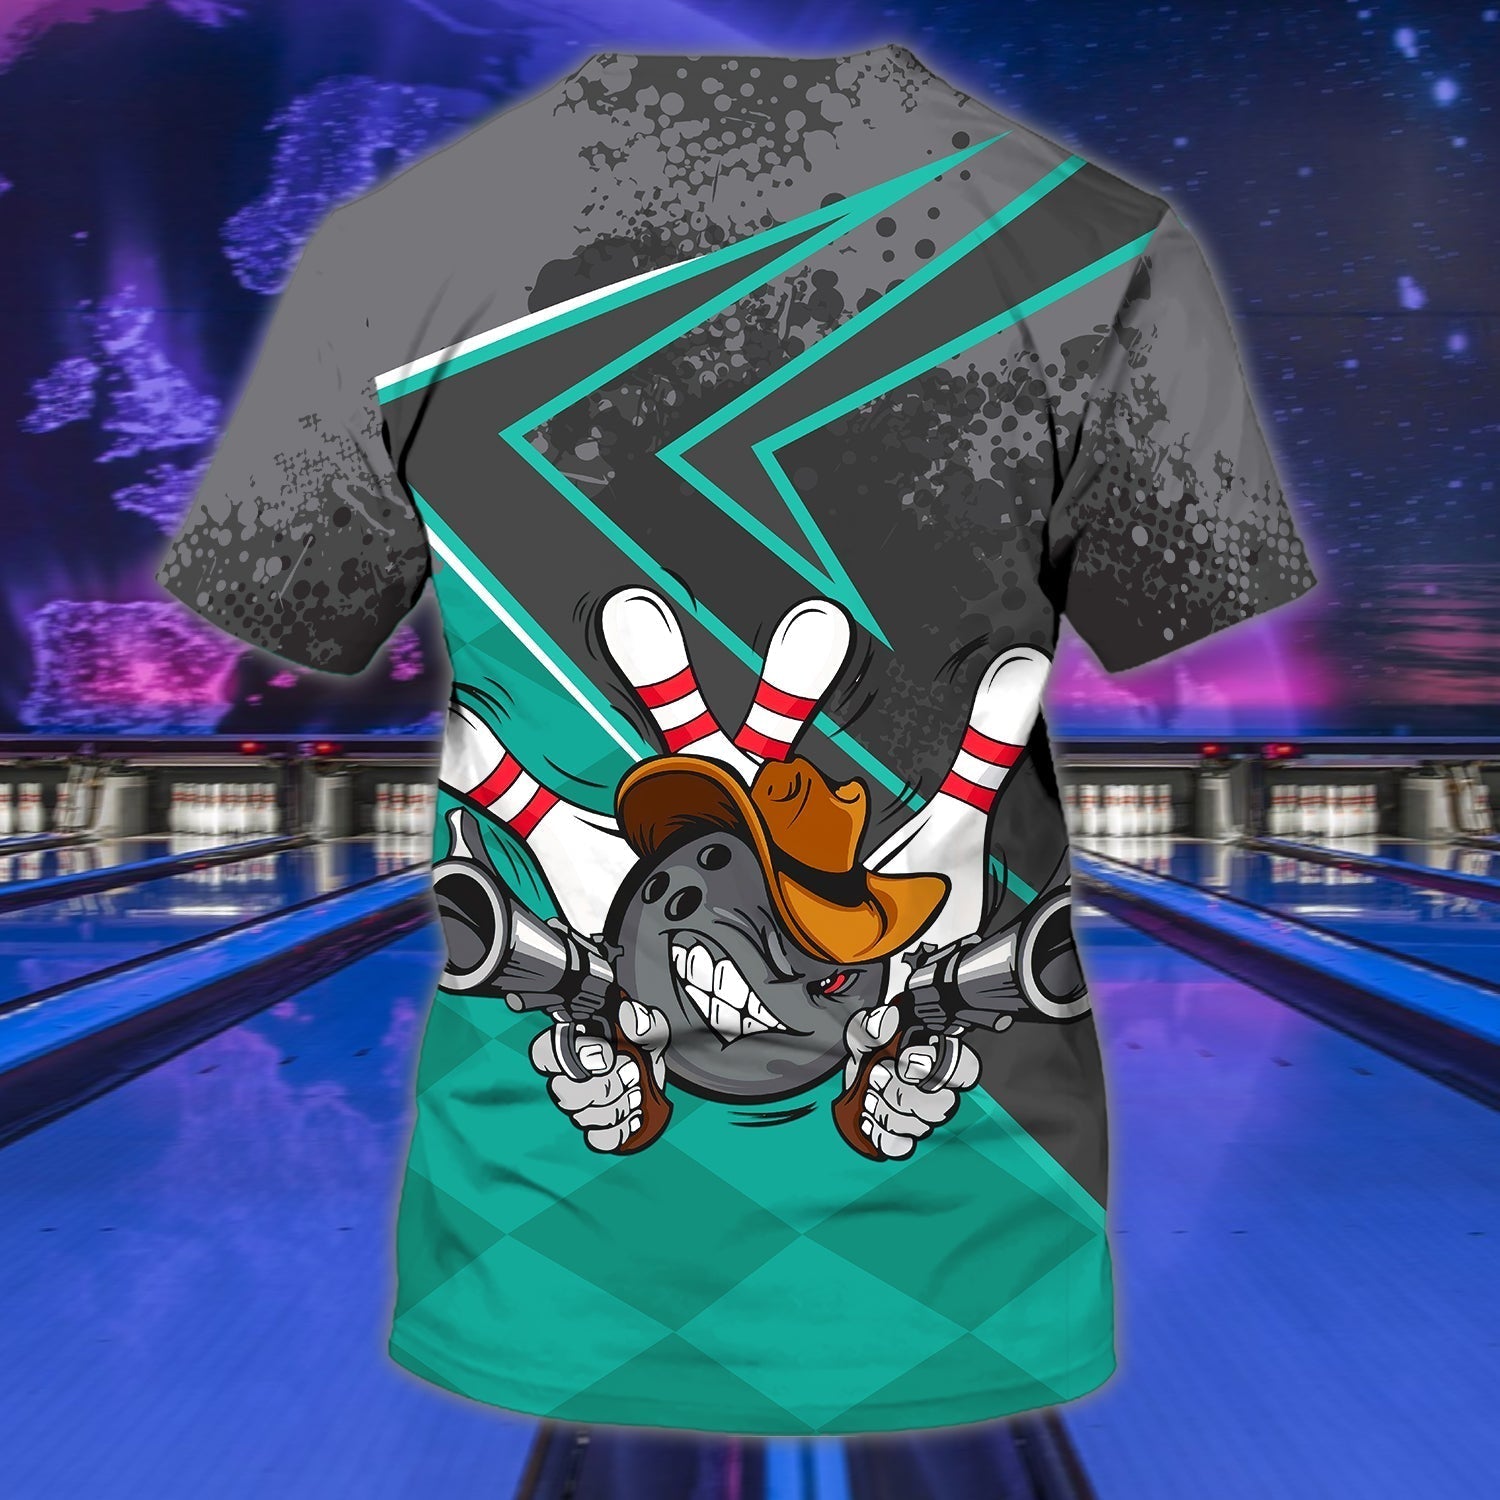 Customized 3D All Over Print Bowling Strike Shirt/ I Am On Strike/ Funny Bowling Shirt/ Bowling T Shirt